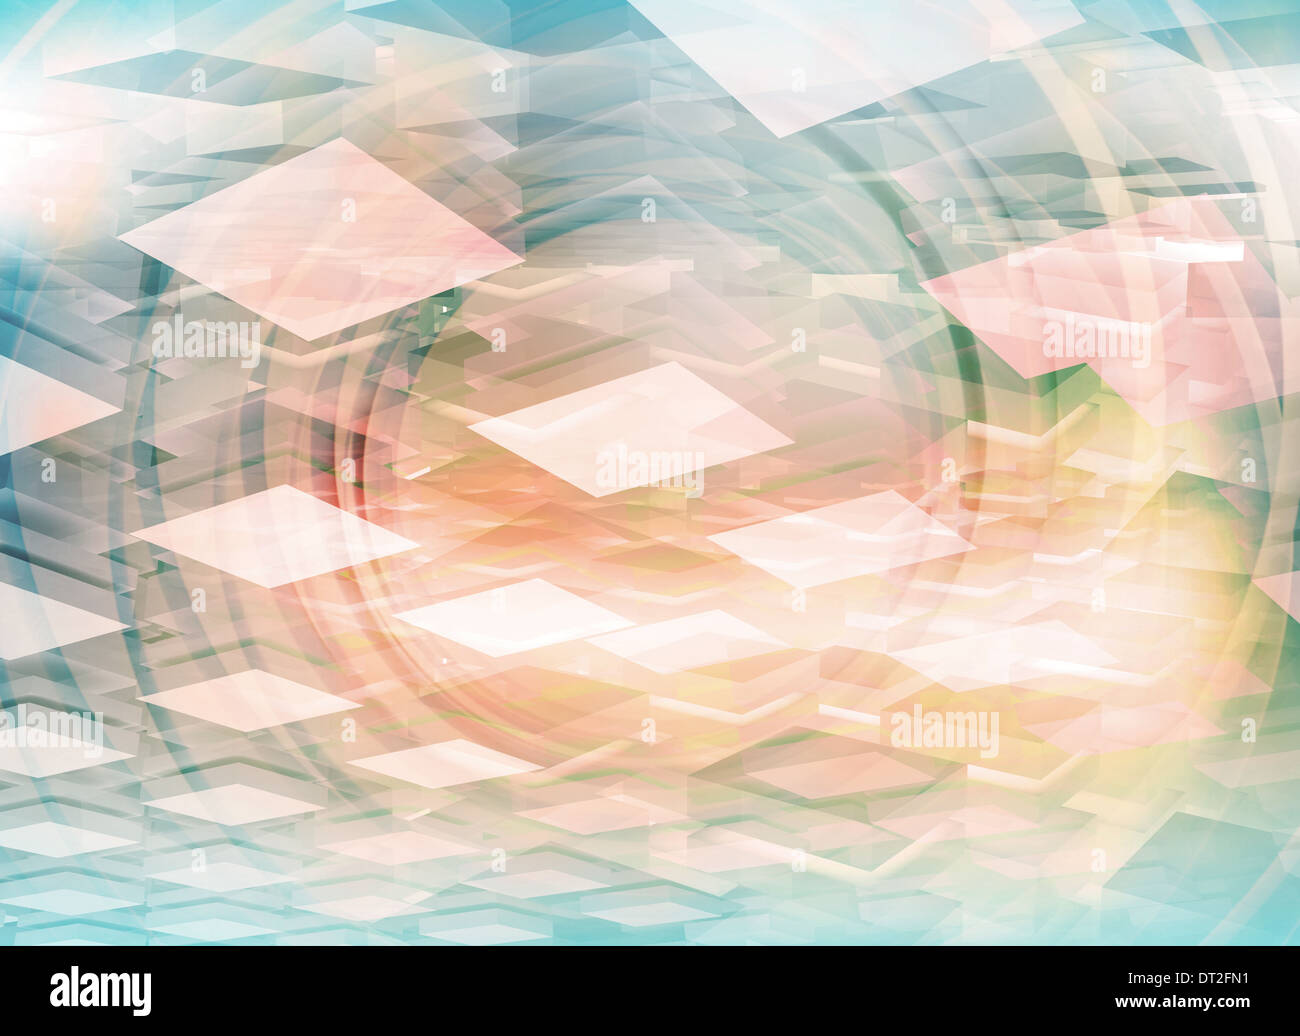 Abstract colorful digital art background with boxes and spiral Stock Photo